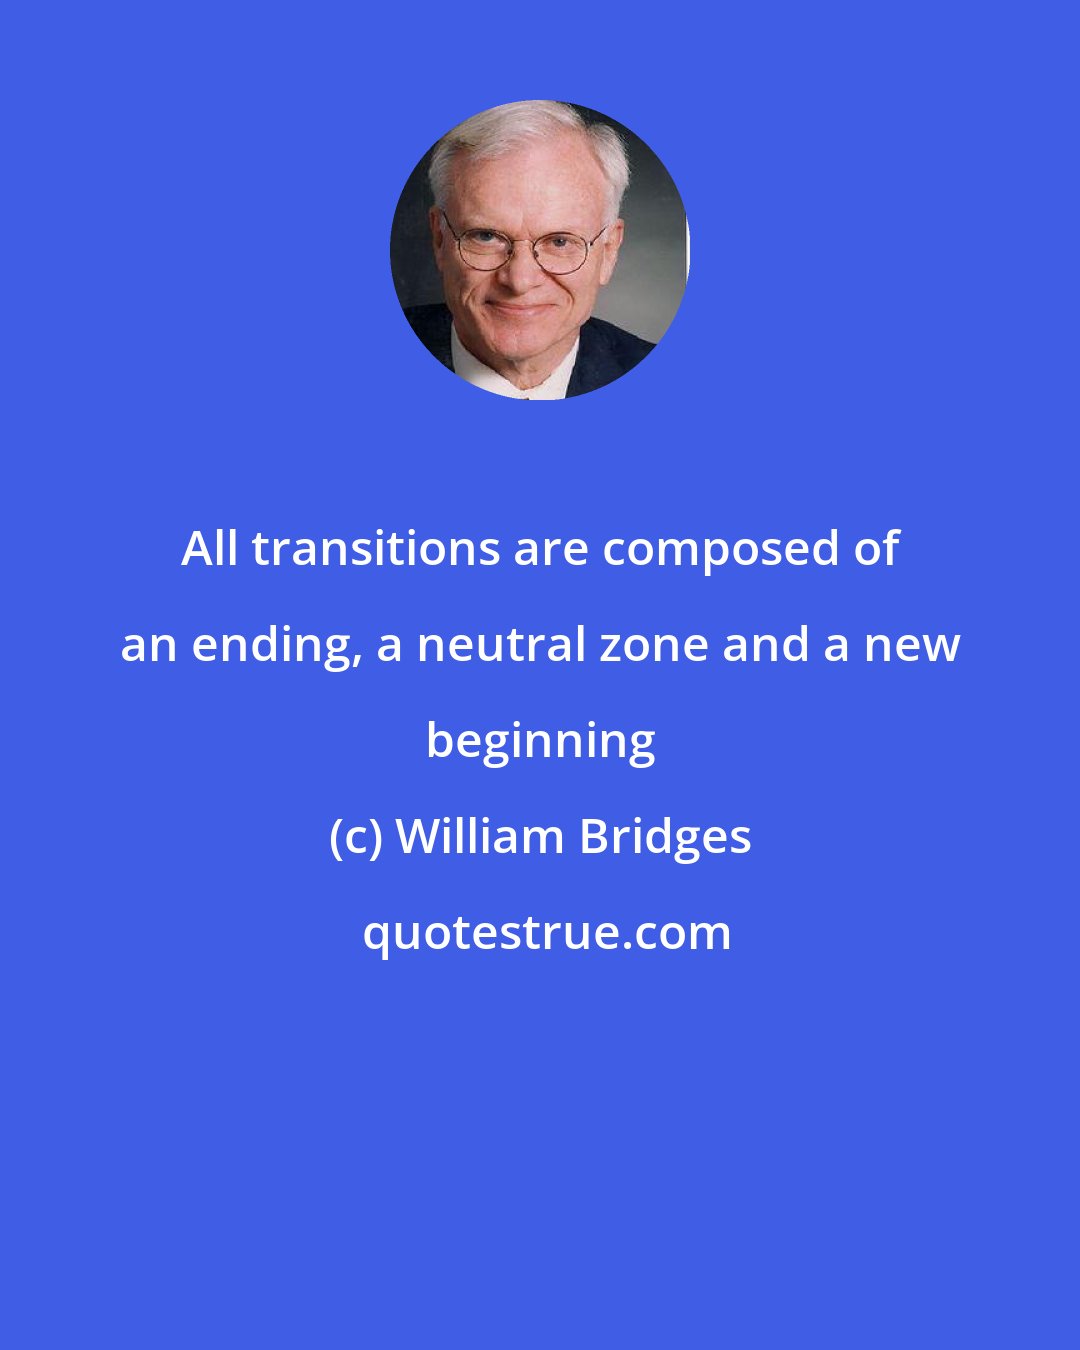 William Bridges: All transitions are composed of an ending, a neutral zone and a new beginning